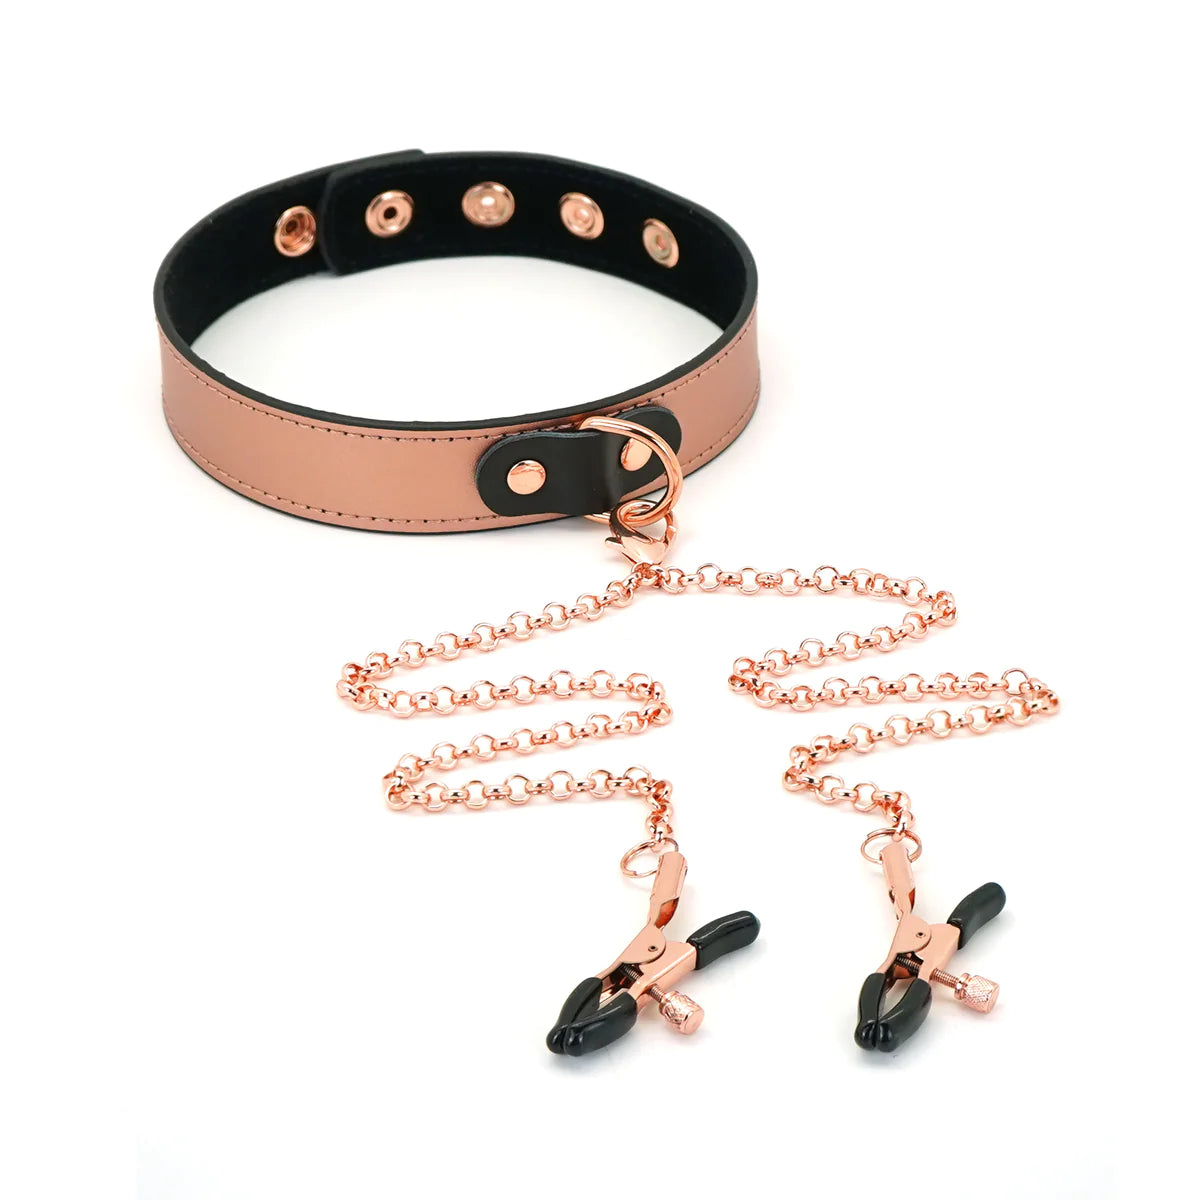  Rose Gold Memory Collar with Nipple Clamps Kink by Liebe Seele- The Nookie